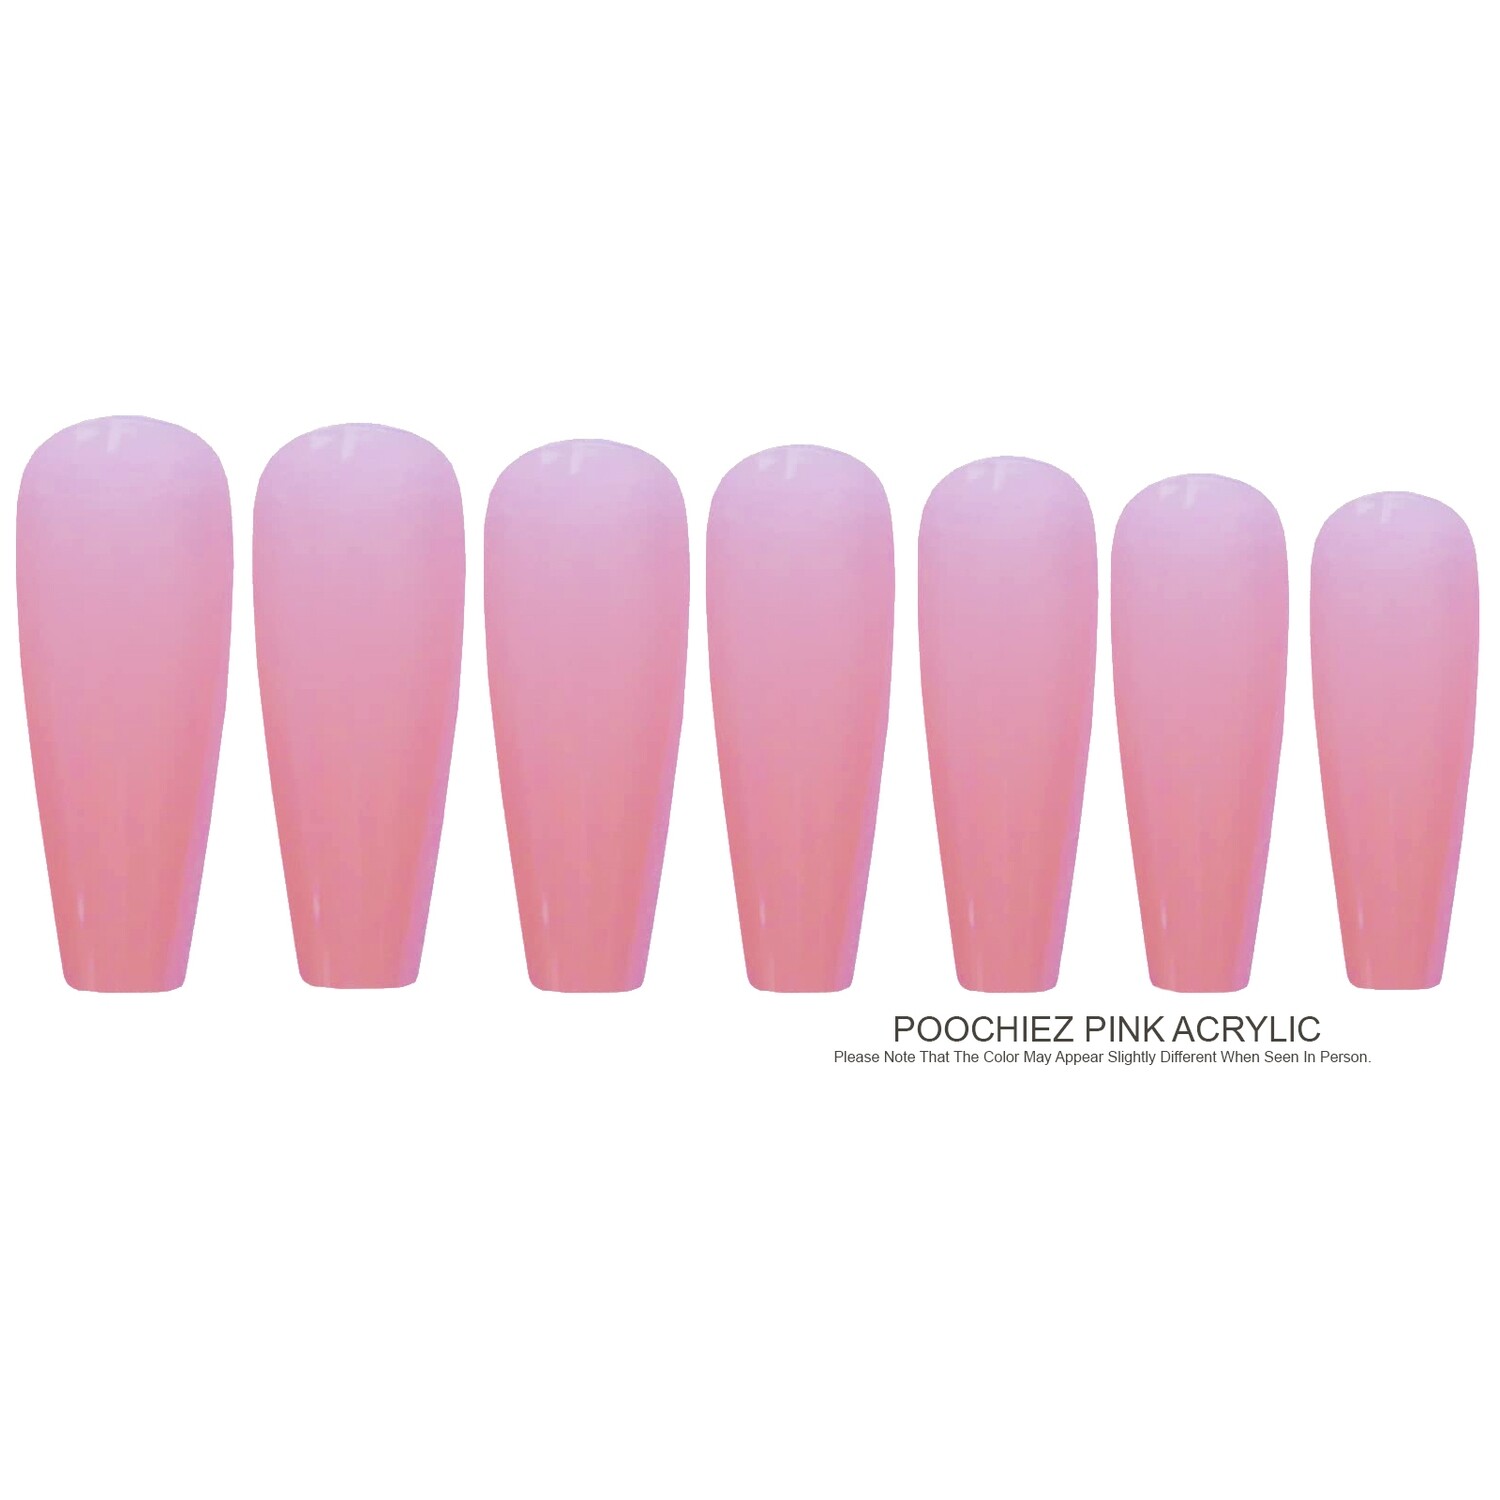 (PA3 ) 1.5 oz POOCHIEZ PINK COVER ACRYLIC